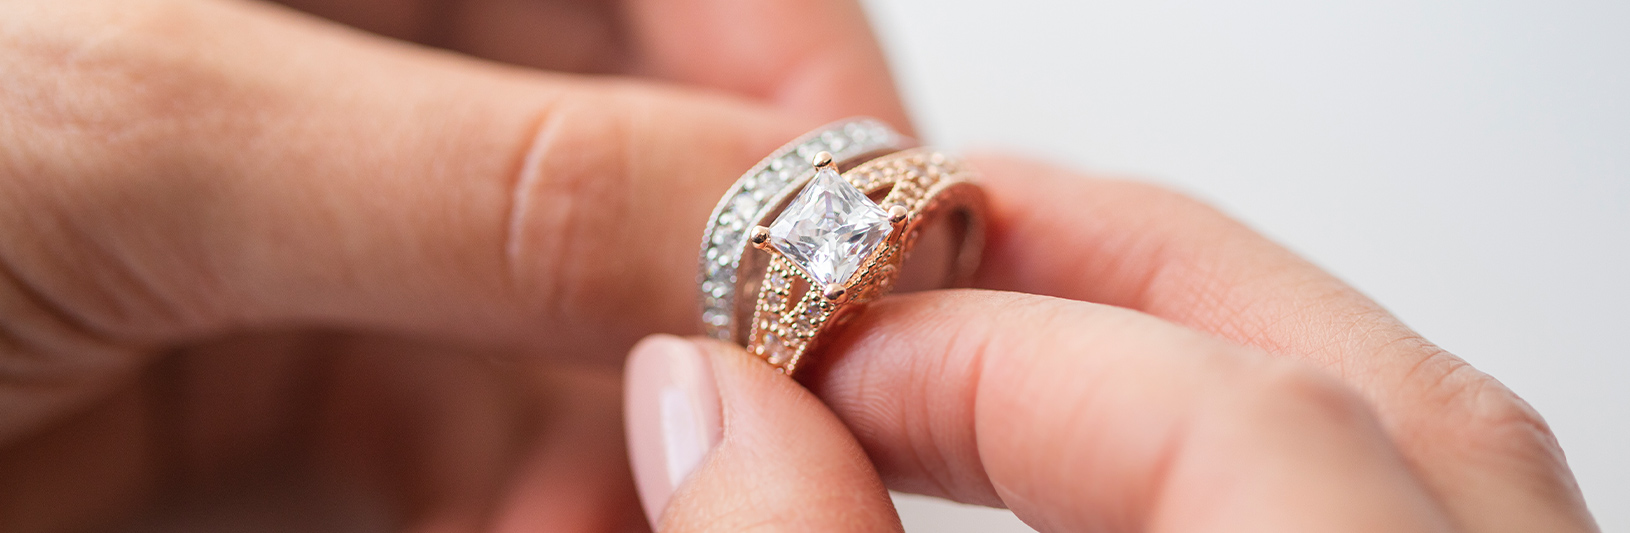 A Princess cut engagement ring paired with a silver accented wedding band